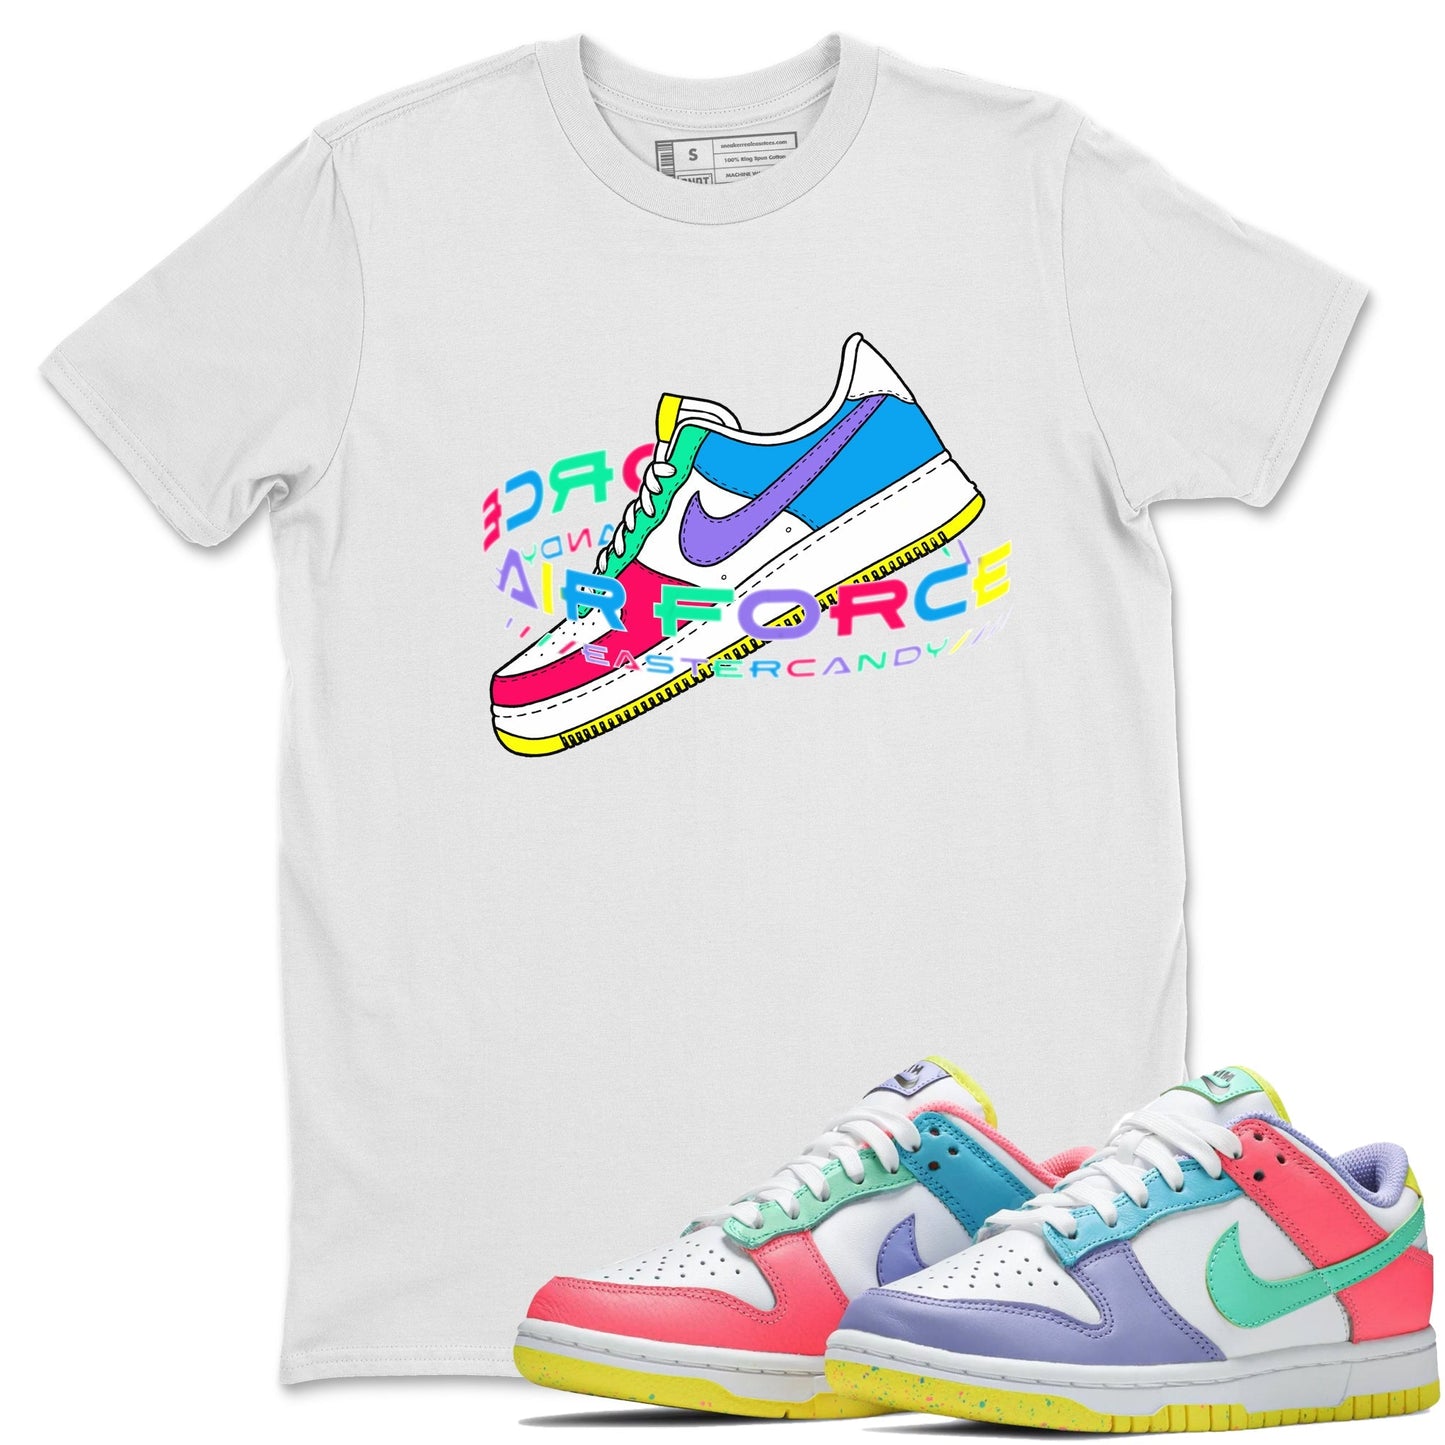 Dunk Easter Candy Sneaker Tees Drip Gear Zone Warping Space Sneaker Tees Nike Easter Shirt Unisex Shirts White 1